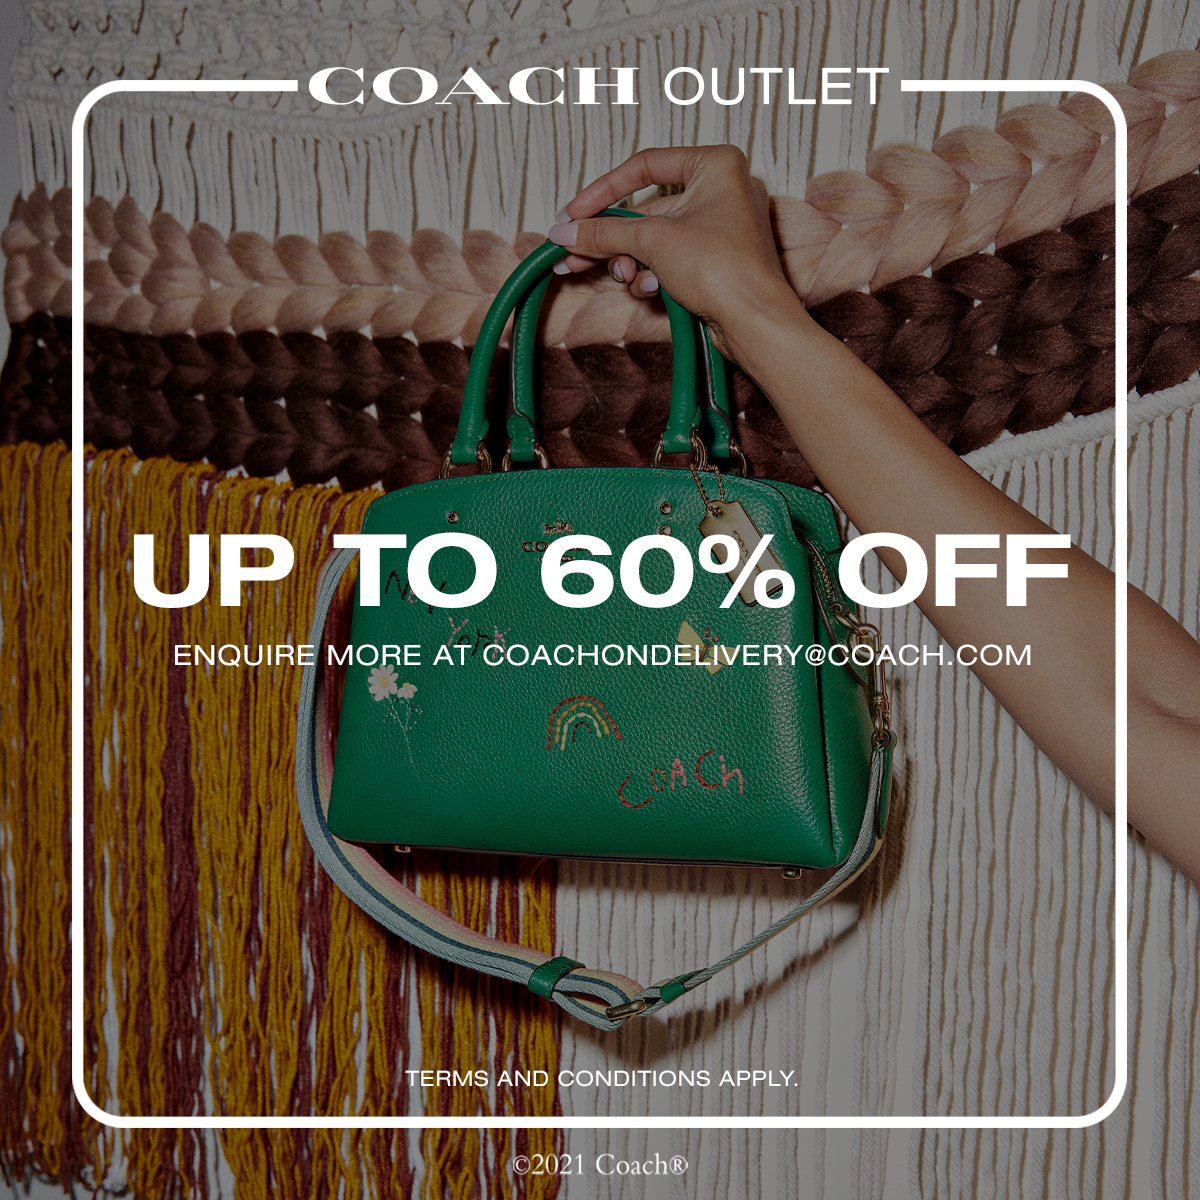 COACH OUTLET CLEARANCE SALES Coach penang design village. Only